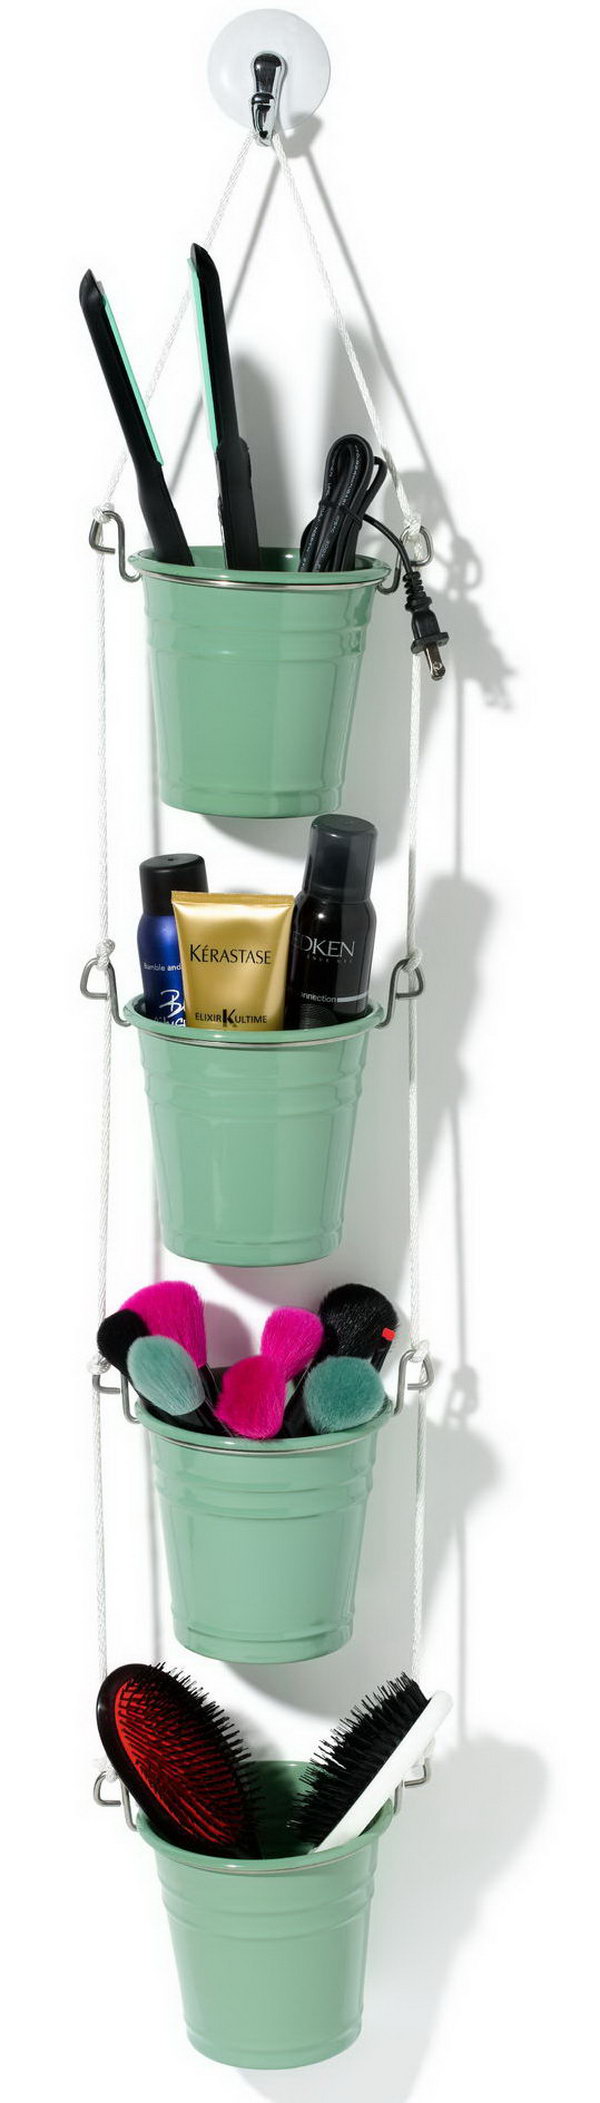 Nice hanging organizer for makeup. This cute little hanging basket makeup organizer is really a great gift for Mother's Day. Start making one for your beloved mother. Step-by-step instructions here.